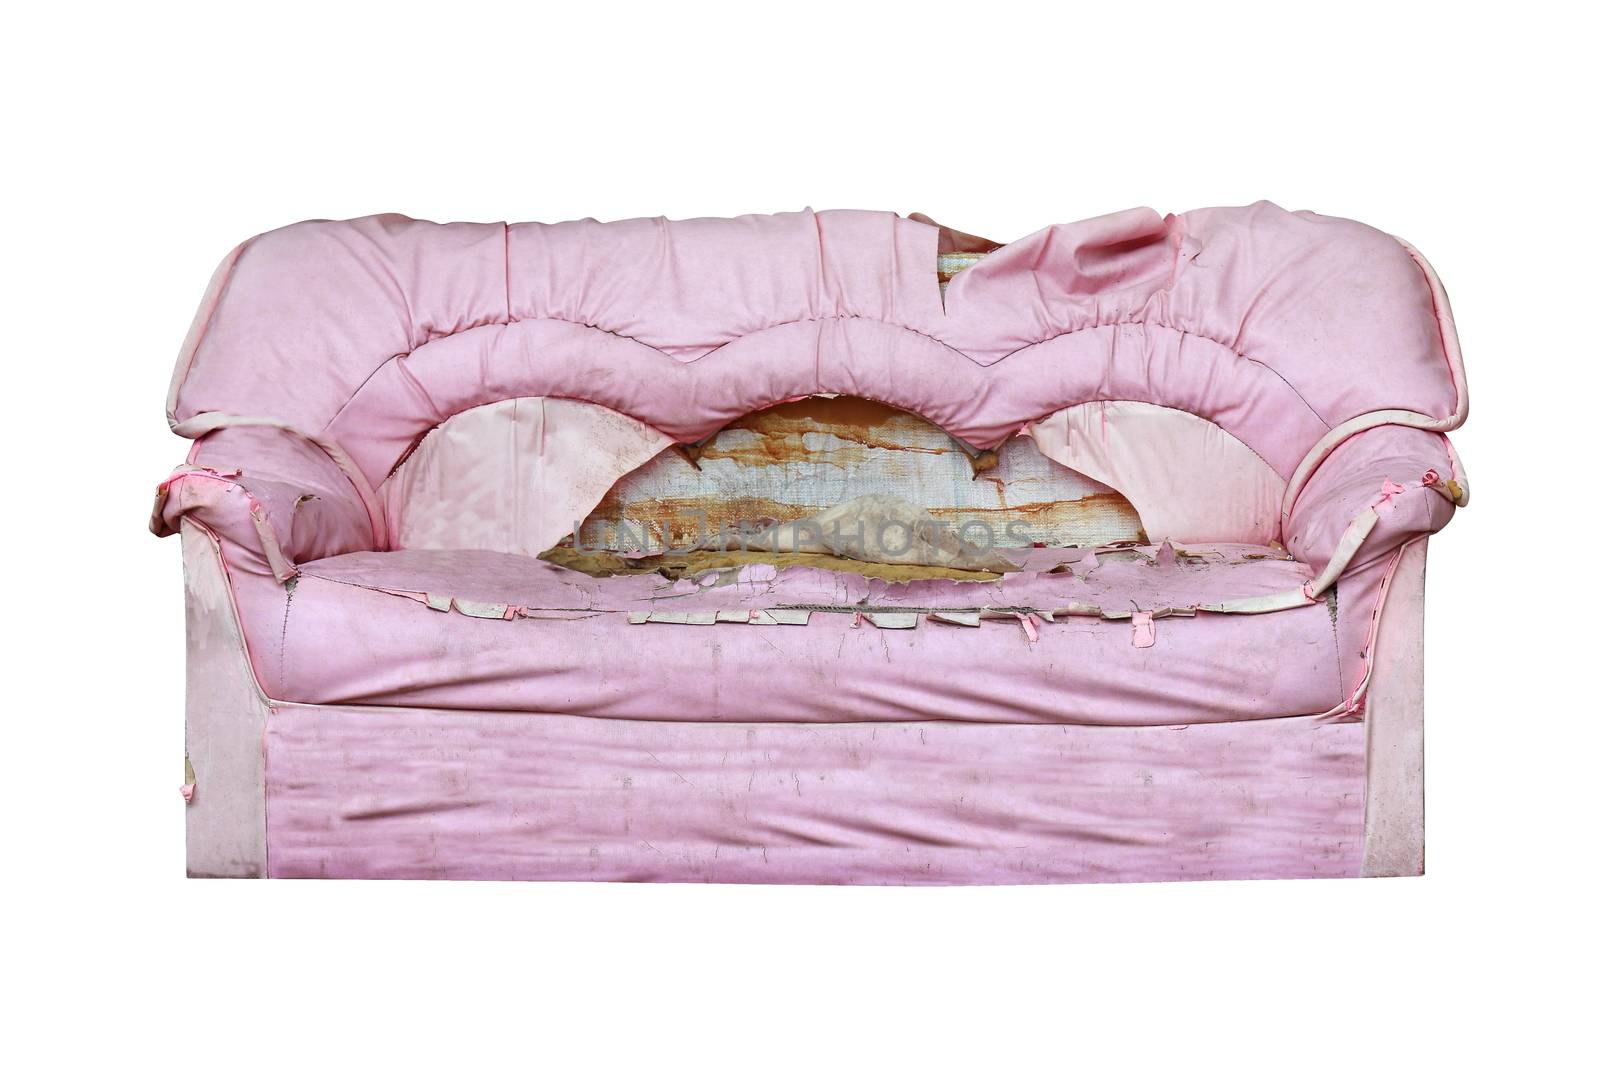 Sofa, Sofa pink old, Sofa dirty isolated on white background by cgdeaw